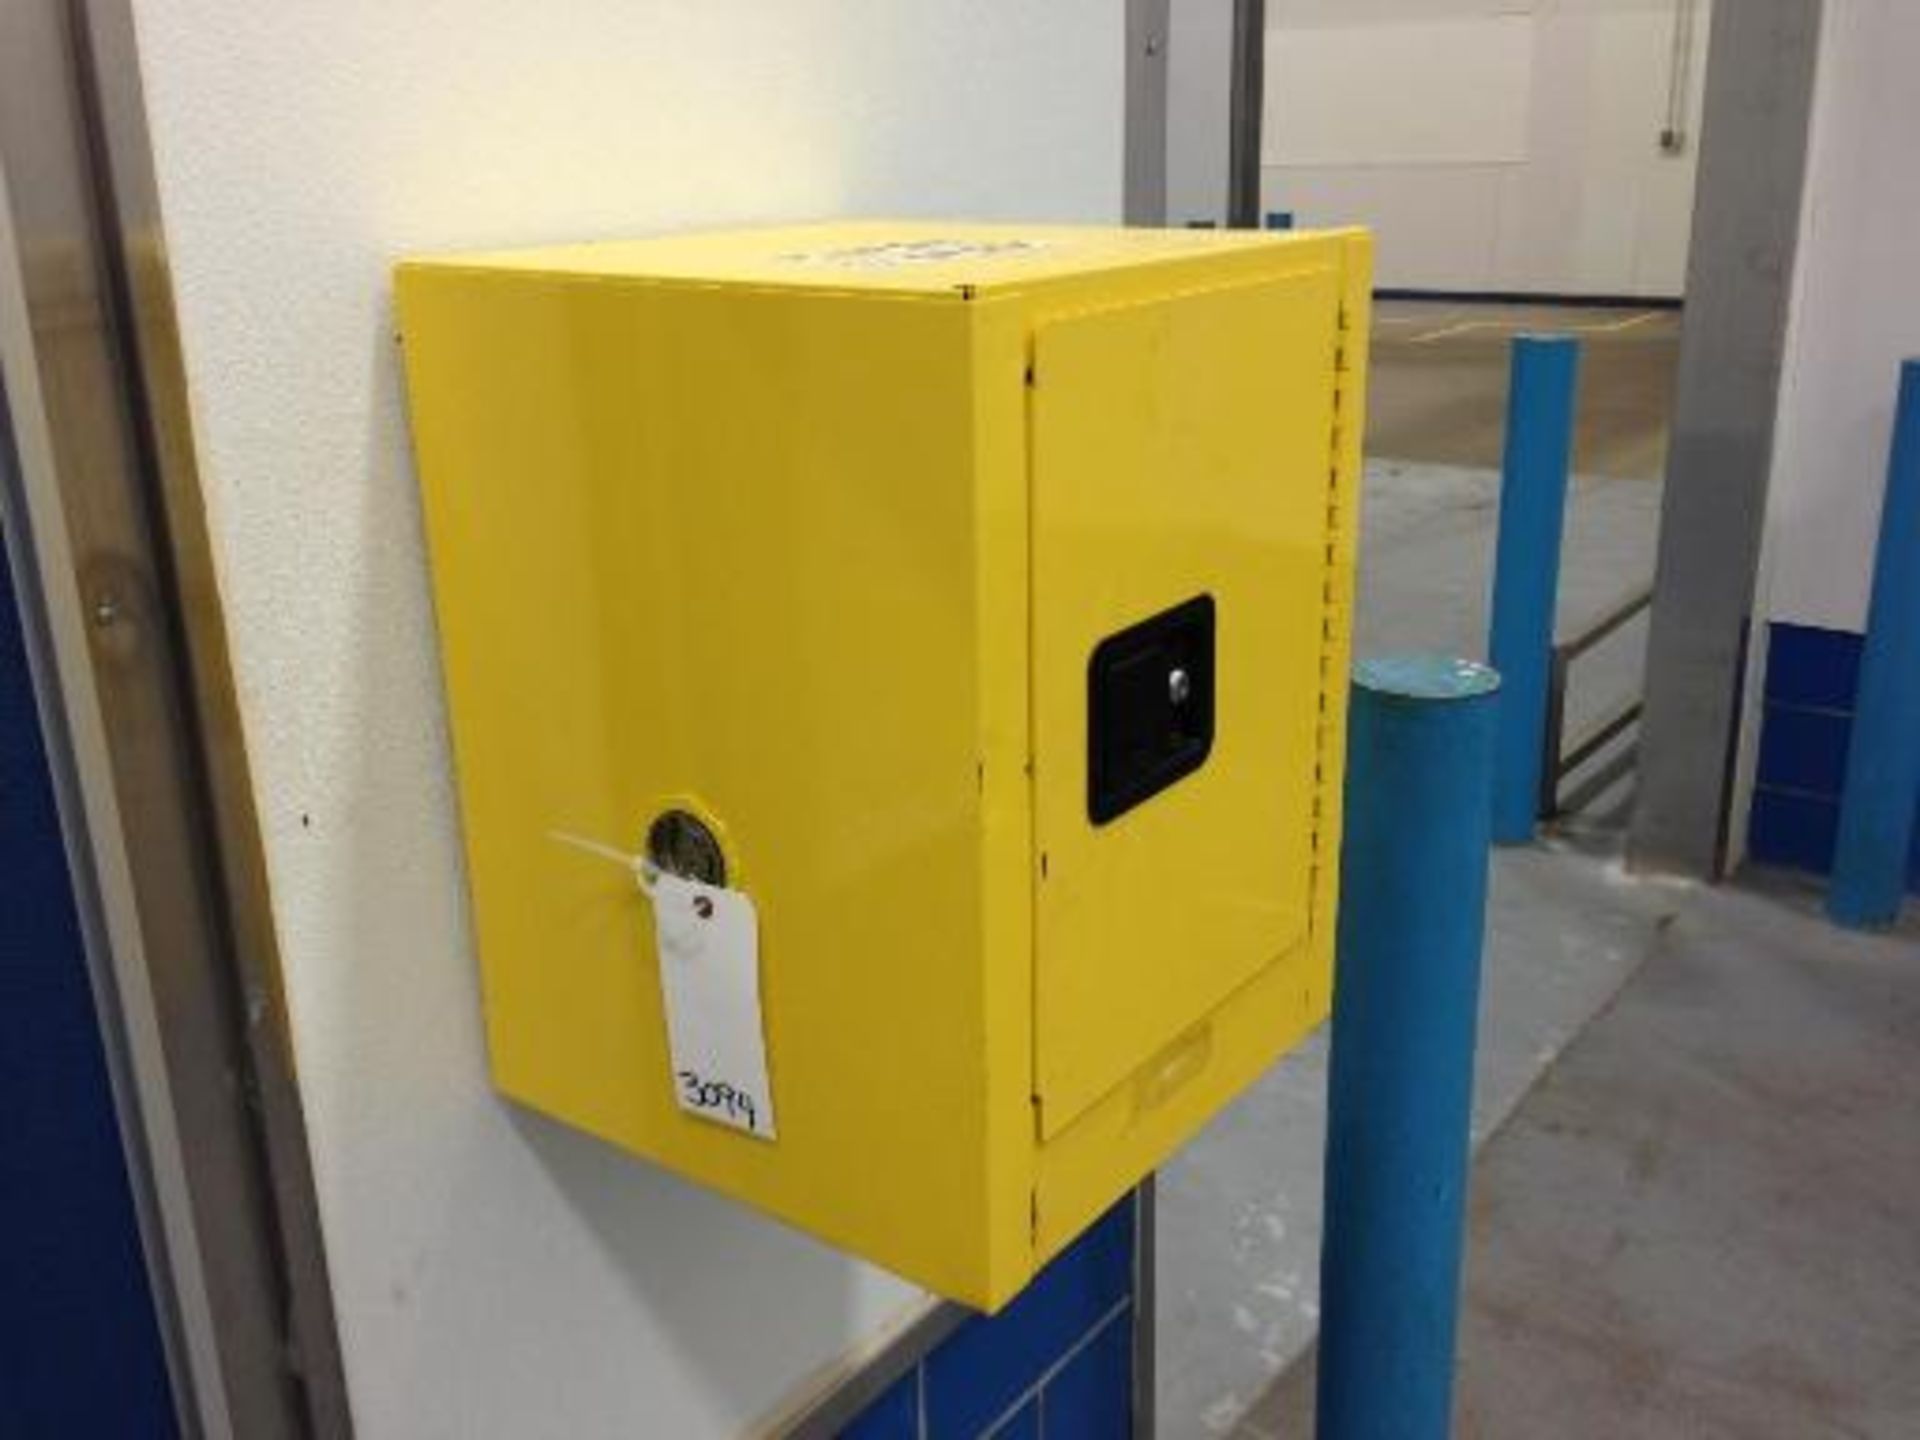 Just -Rite wall mount flammable storage cabinet 17 wide x 22 tall x 17 inches deep This item located